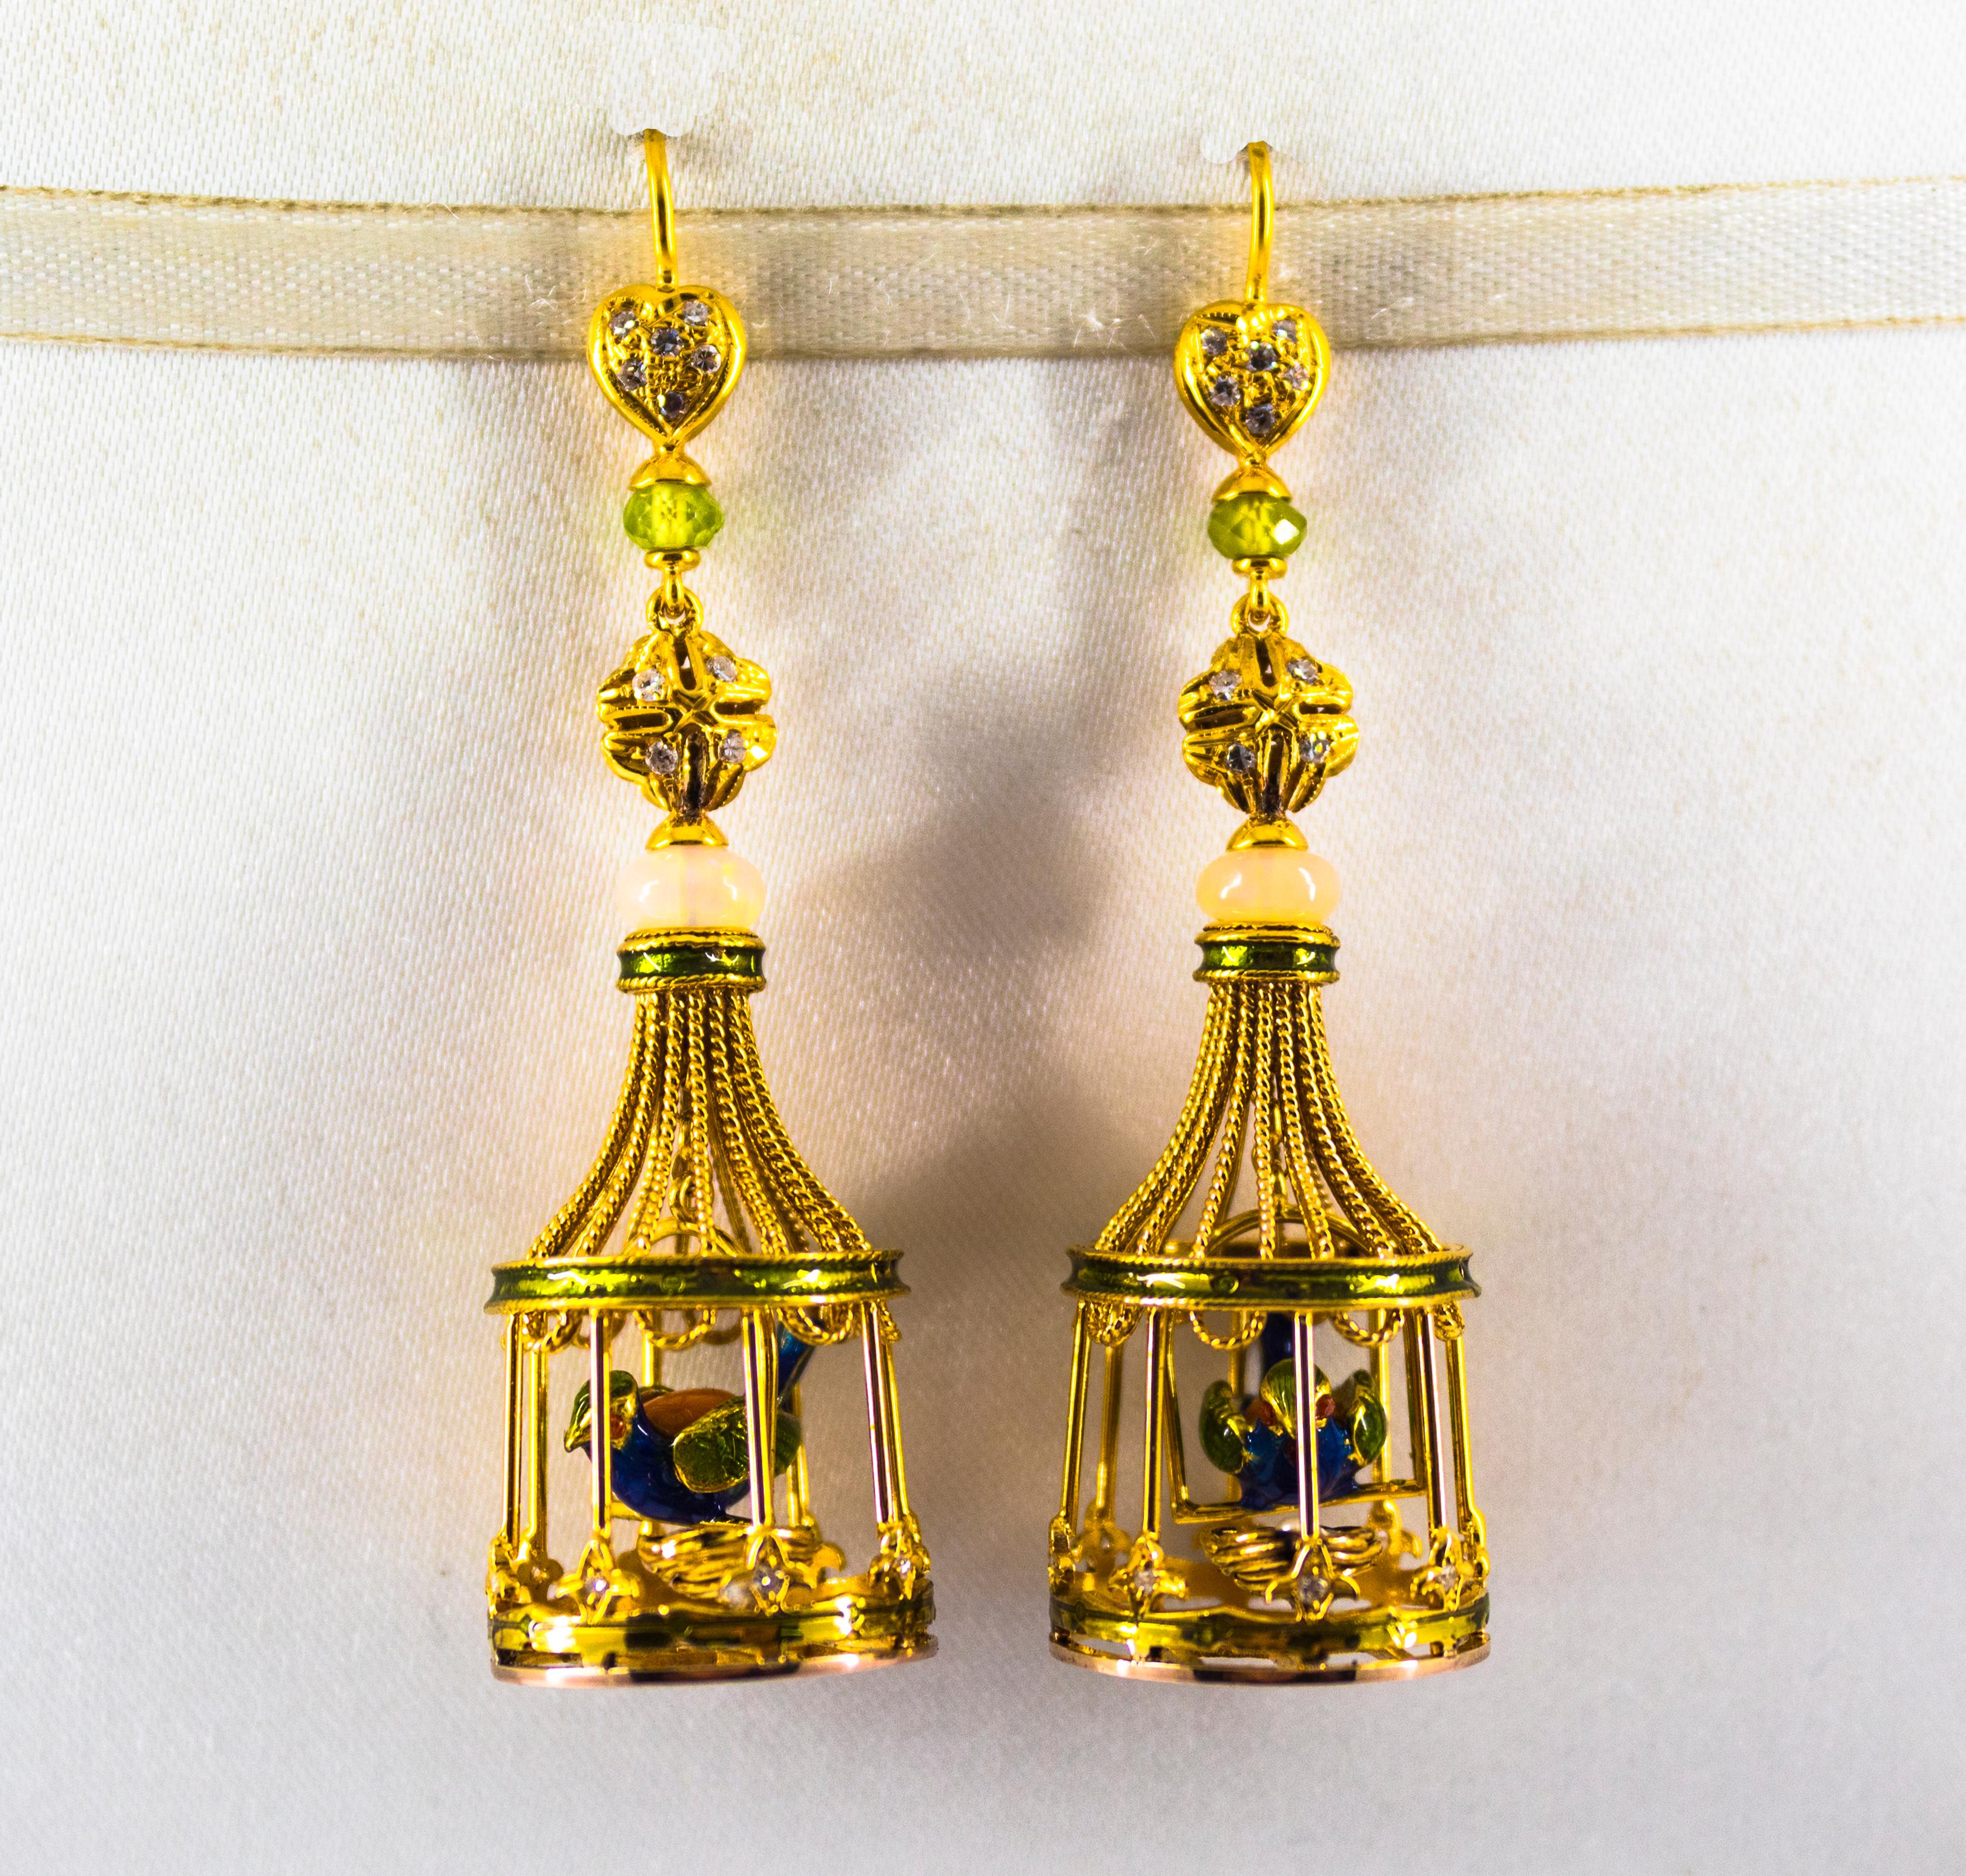 These Stud Earrings are made of 9K Yellow Gold.
These Earrings have 0.40 Carats of White Diamonds.
These Earrings have Opal and Peridot.
These Earrings have also Coral, Enamel and Pearls.
All our Earrings have pins for pierced ears but we can change